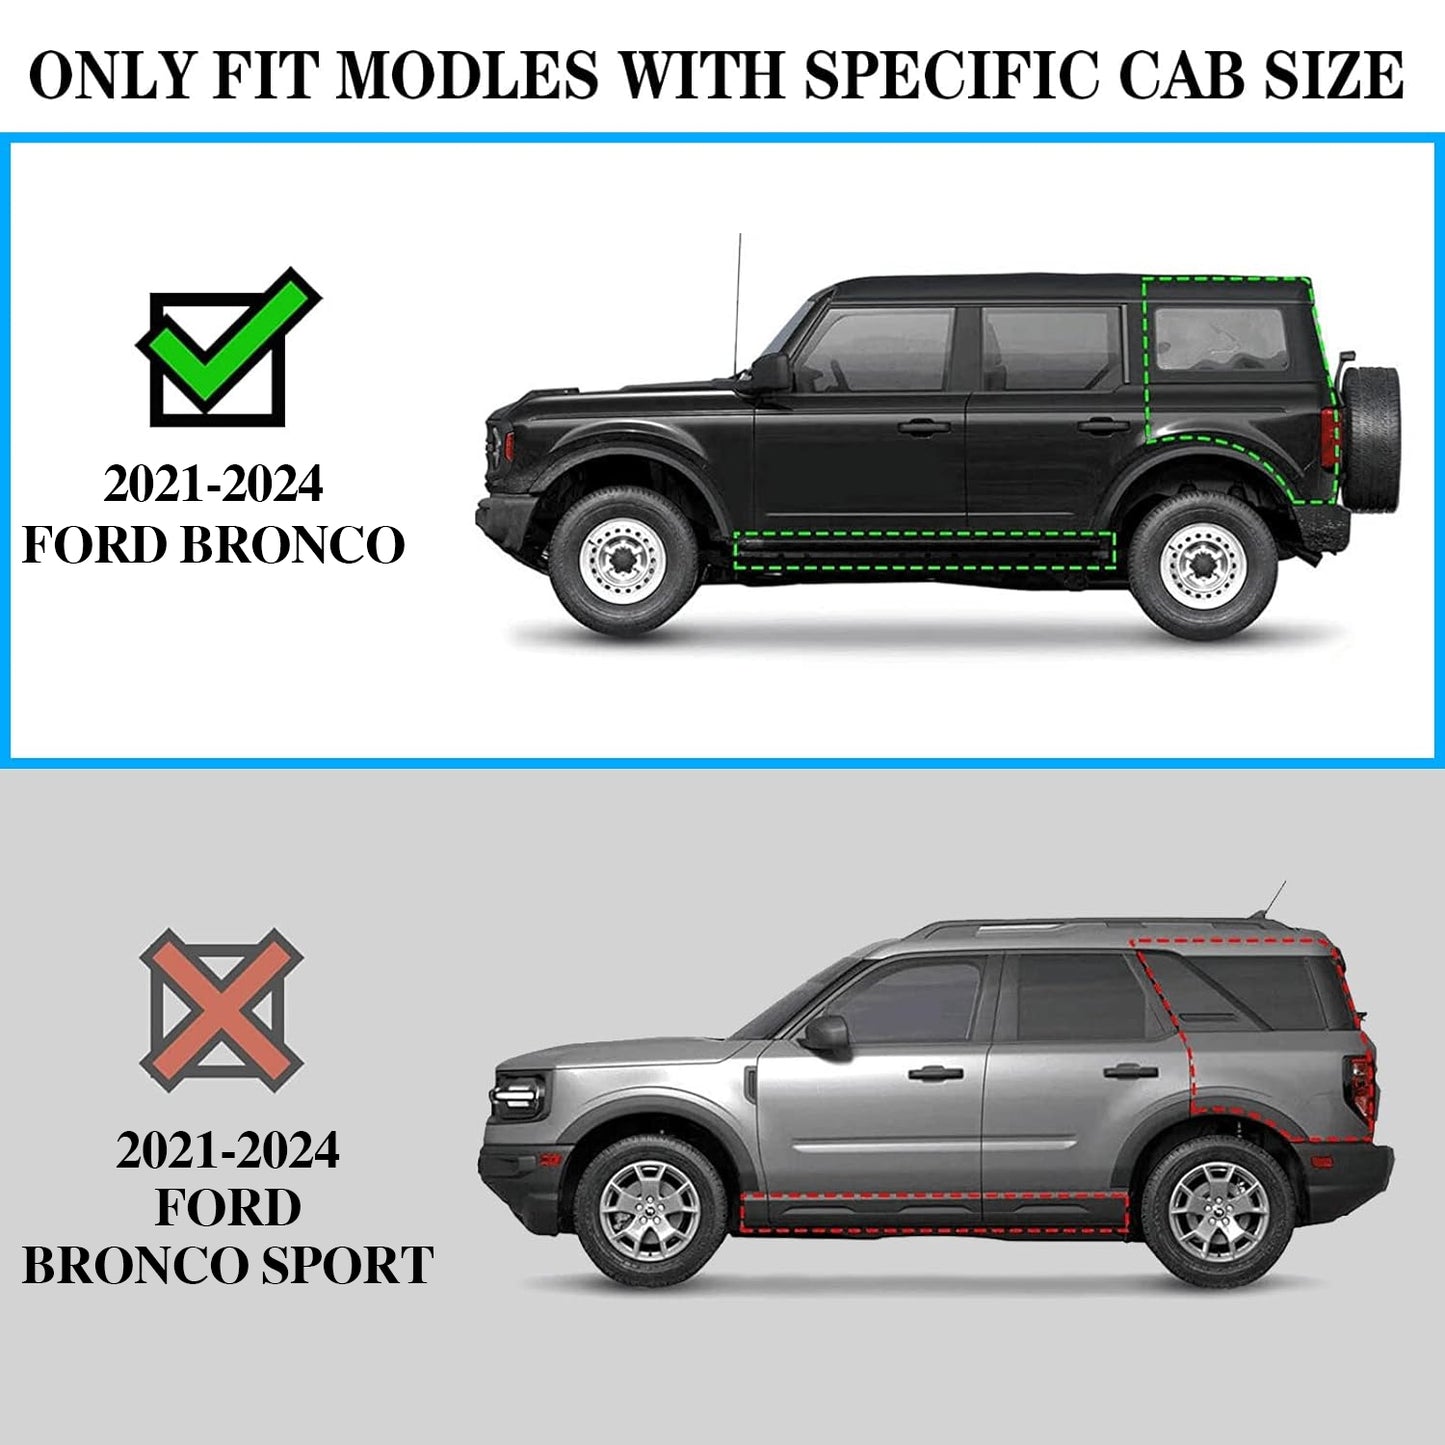 Running Boards for 2021-2024 Ford Bronco 4 Doors 8X Style.- COMNOVA AUTOPART